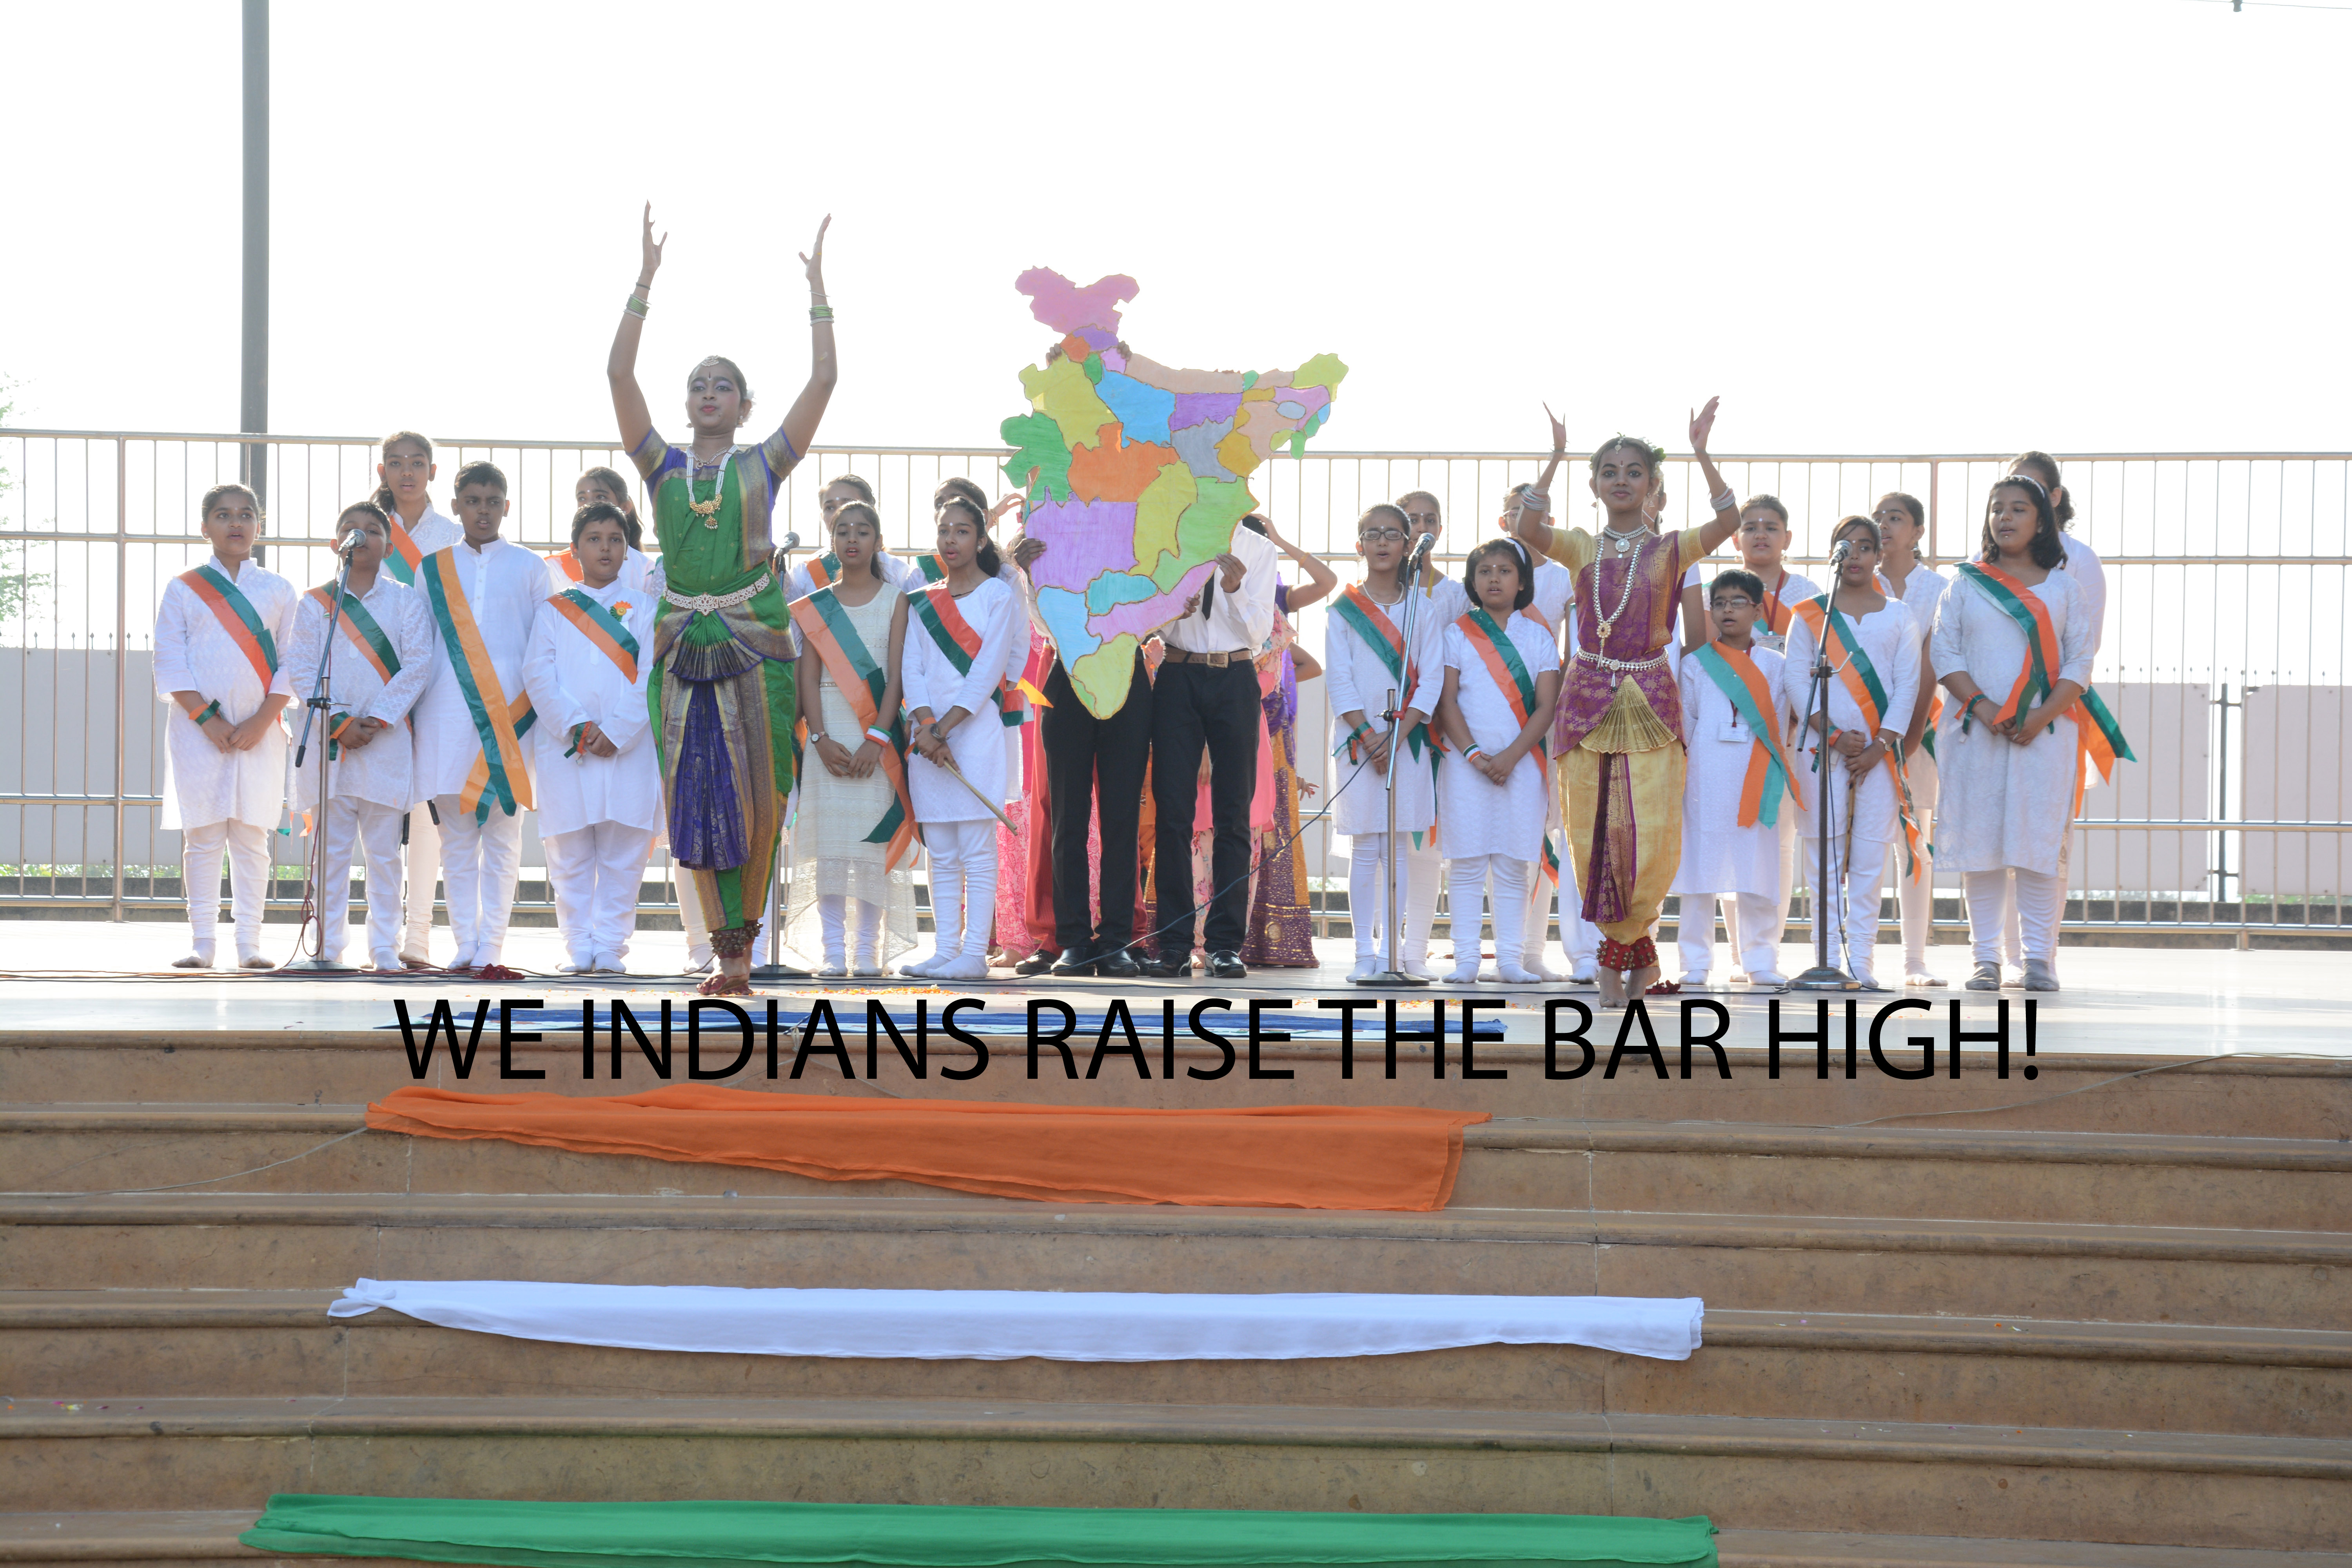 We are proud to be citizens of India